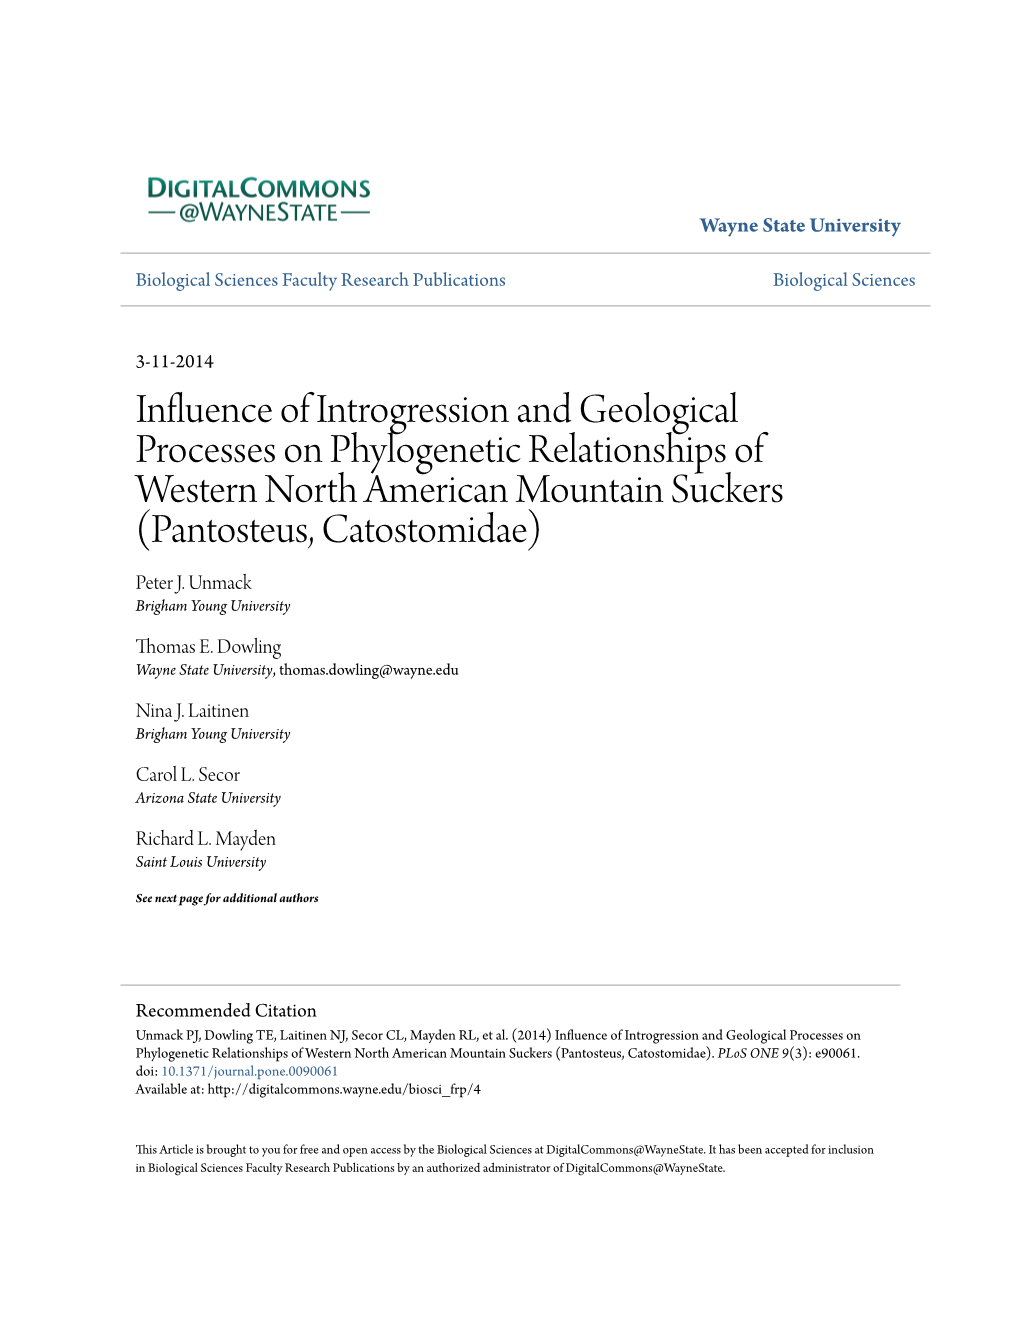 Influence of Introgression and Geological Processes on Phylogenetic Relationships of Western North American Mountain Suckers (Pantosteus, Catostomidae) Peter J